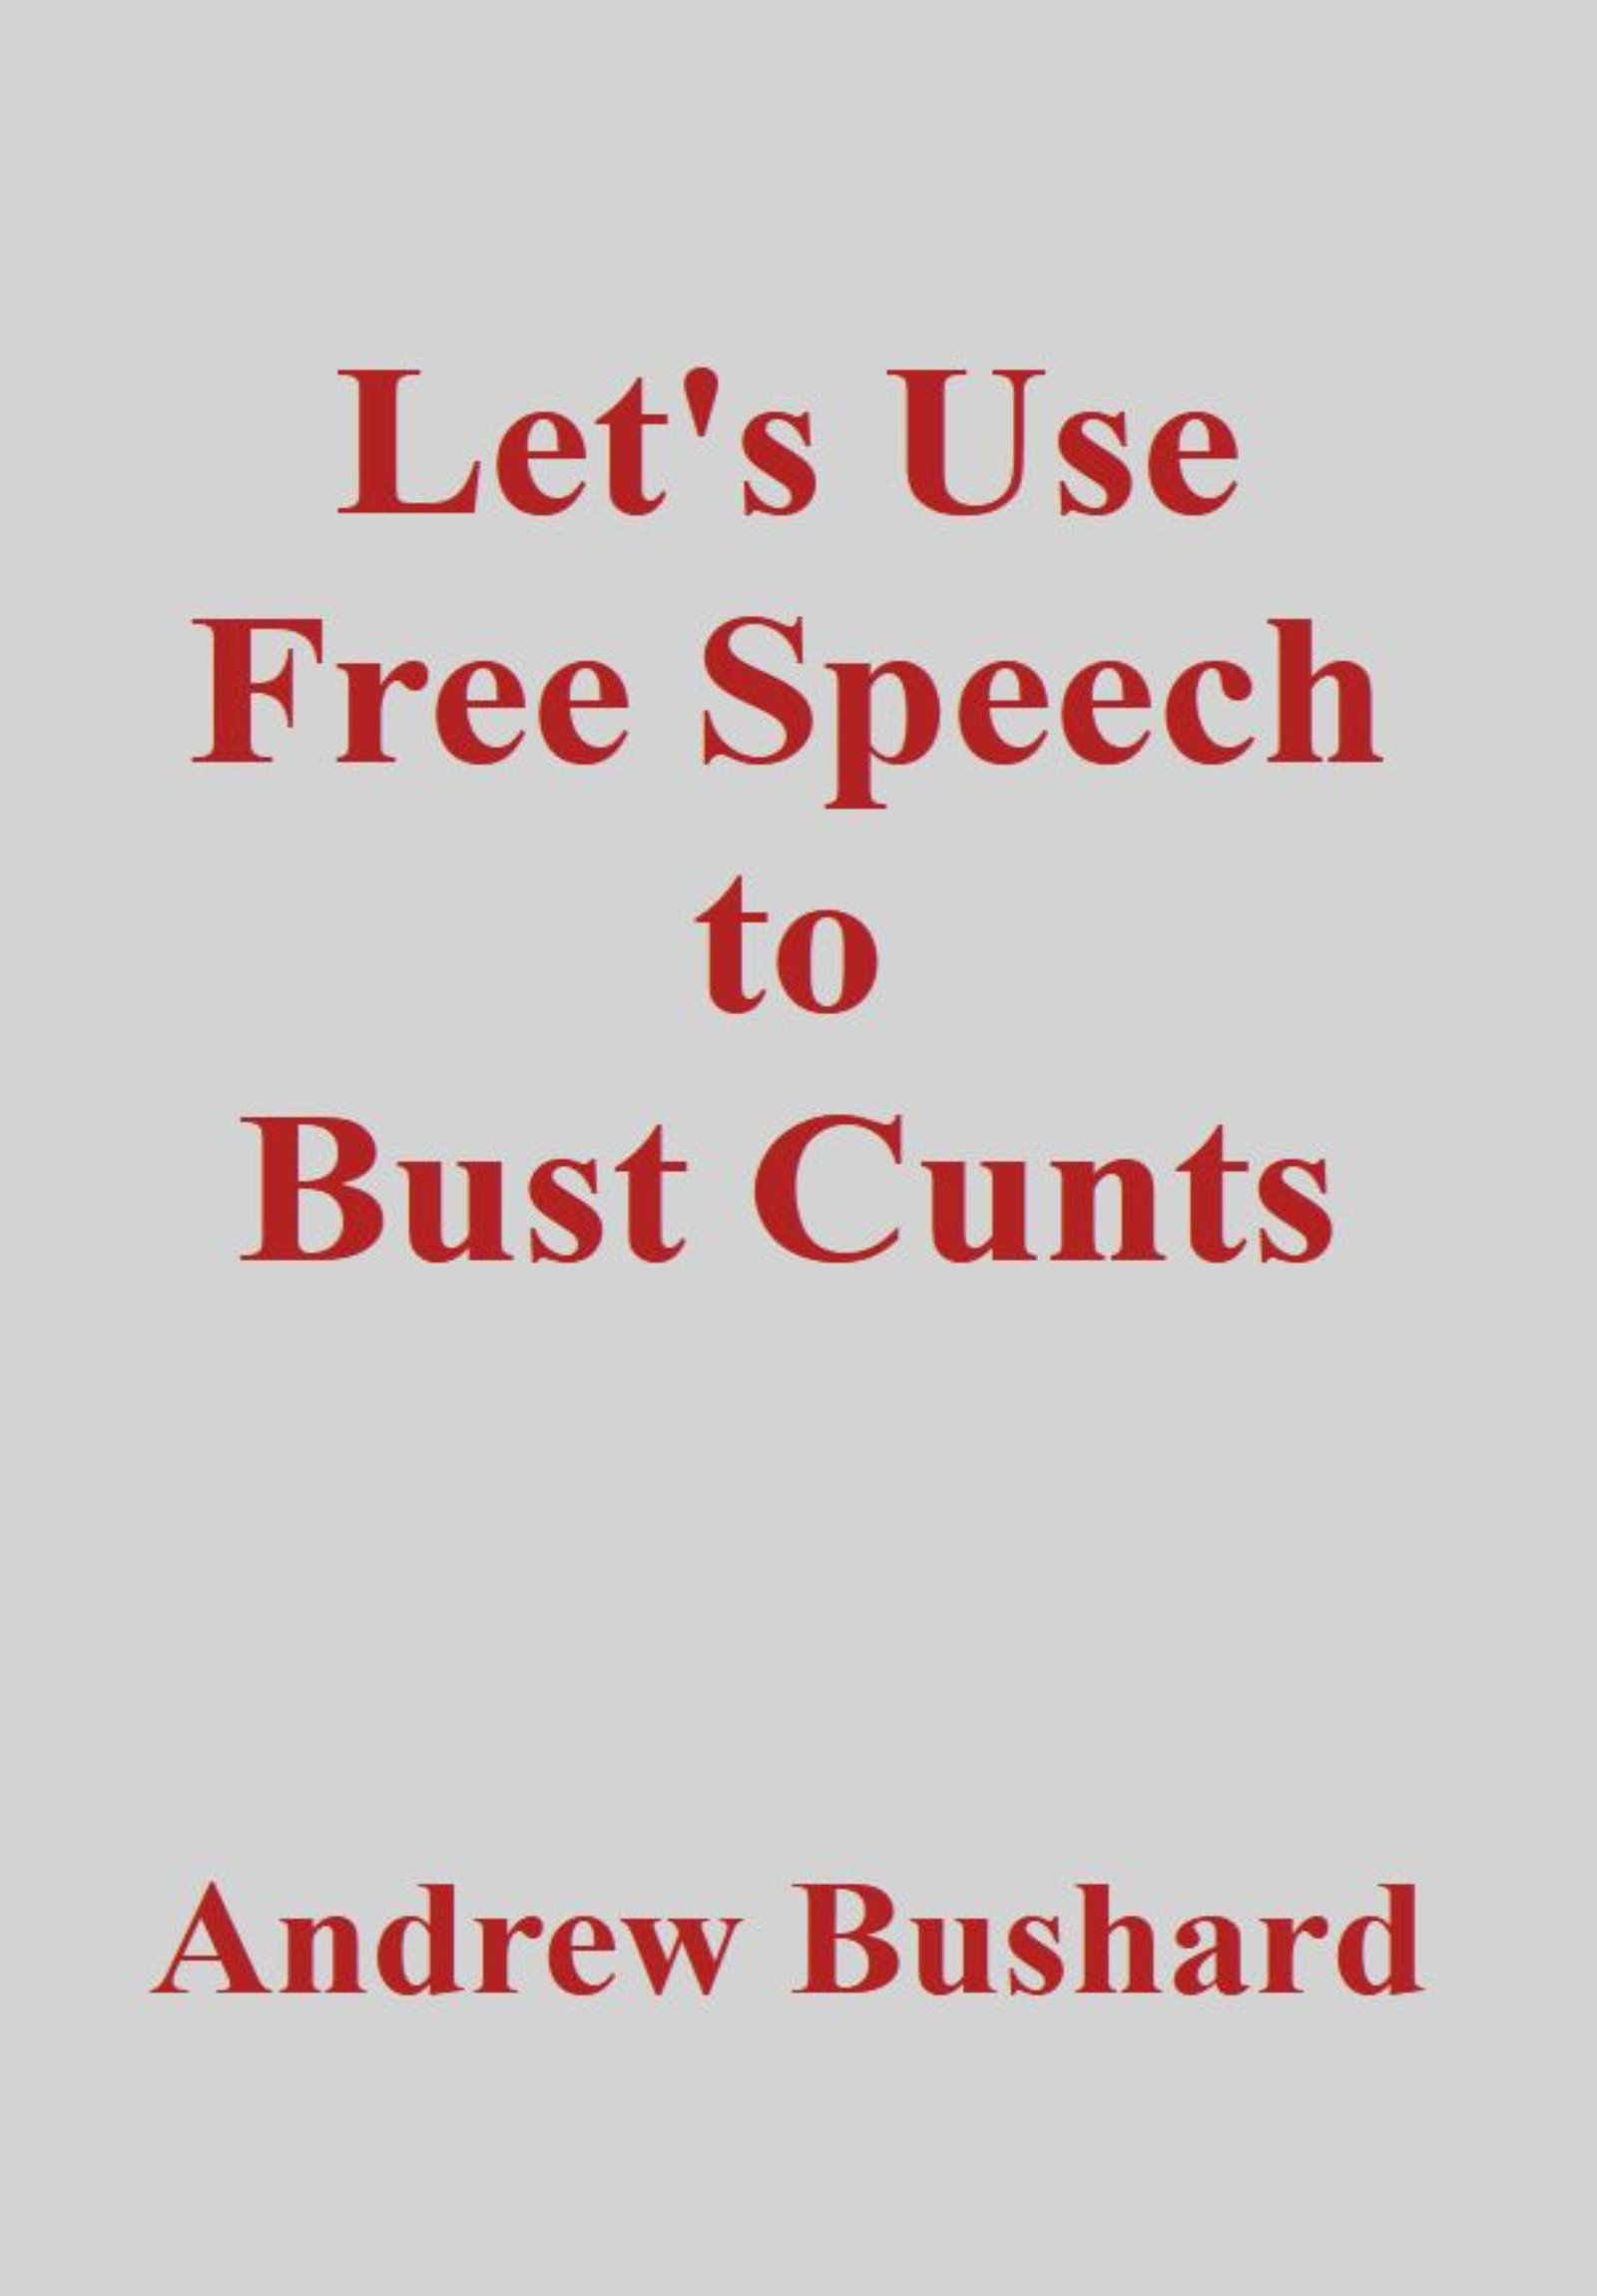 Let's Use Free Speech to Bust Cunts